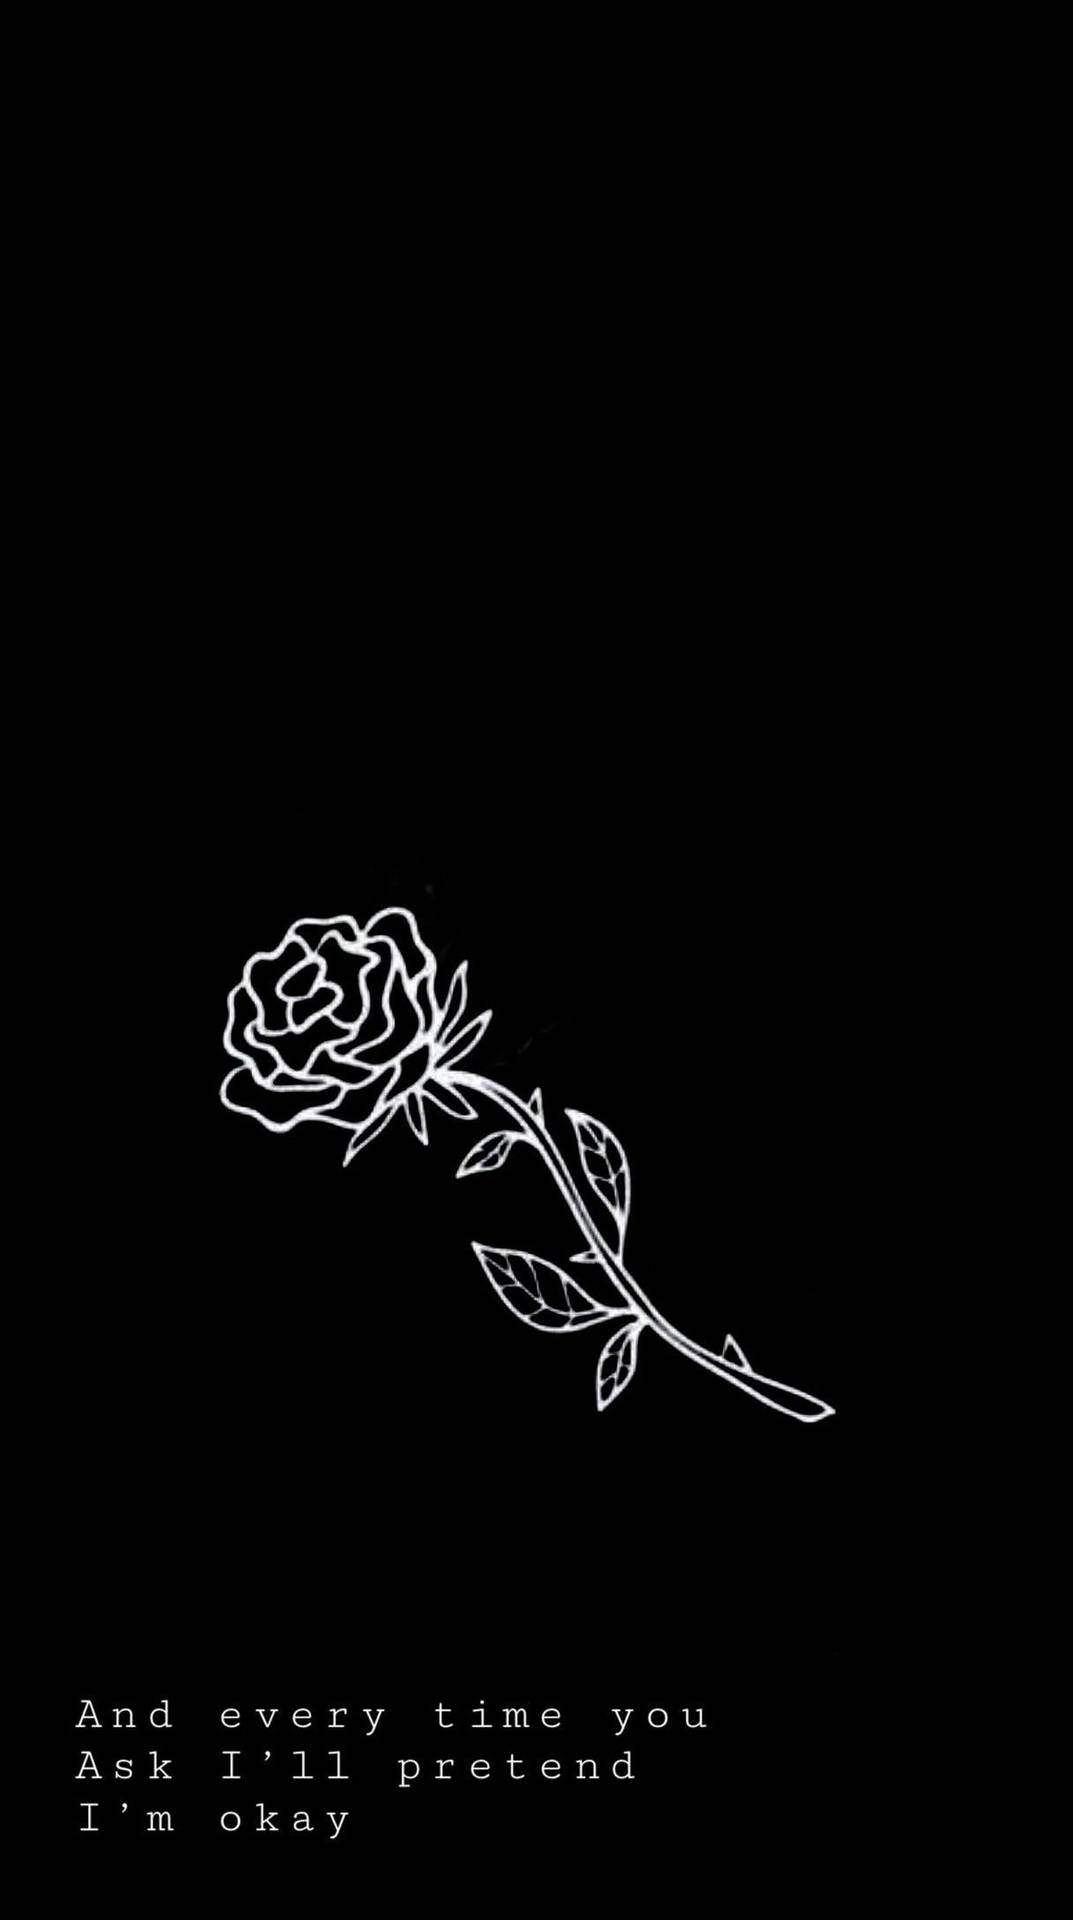 Okay Quote With Rose Illustration Background